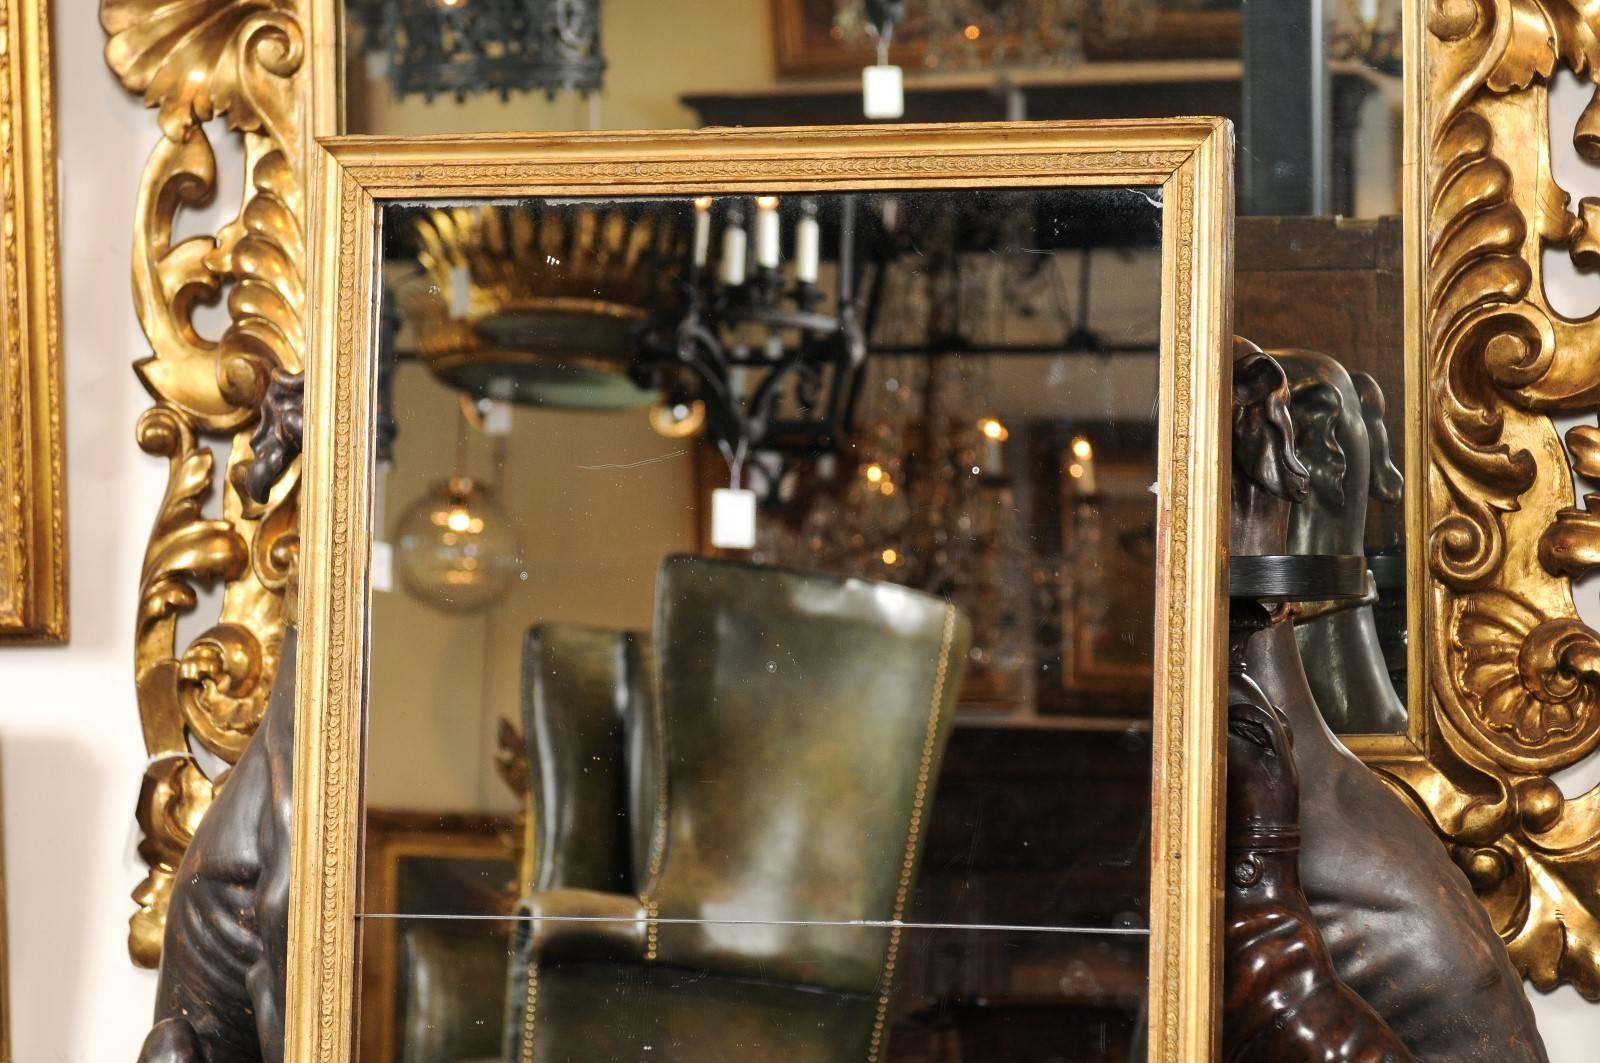 20th Century French Full Length Mirror with Giltwood Frame from the Turn of the Century